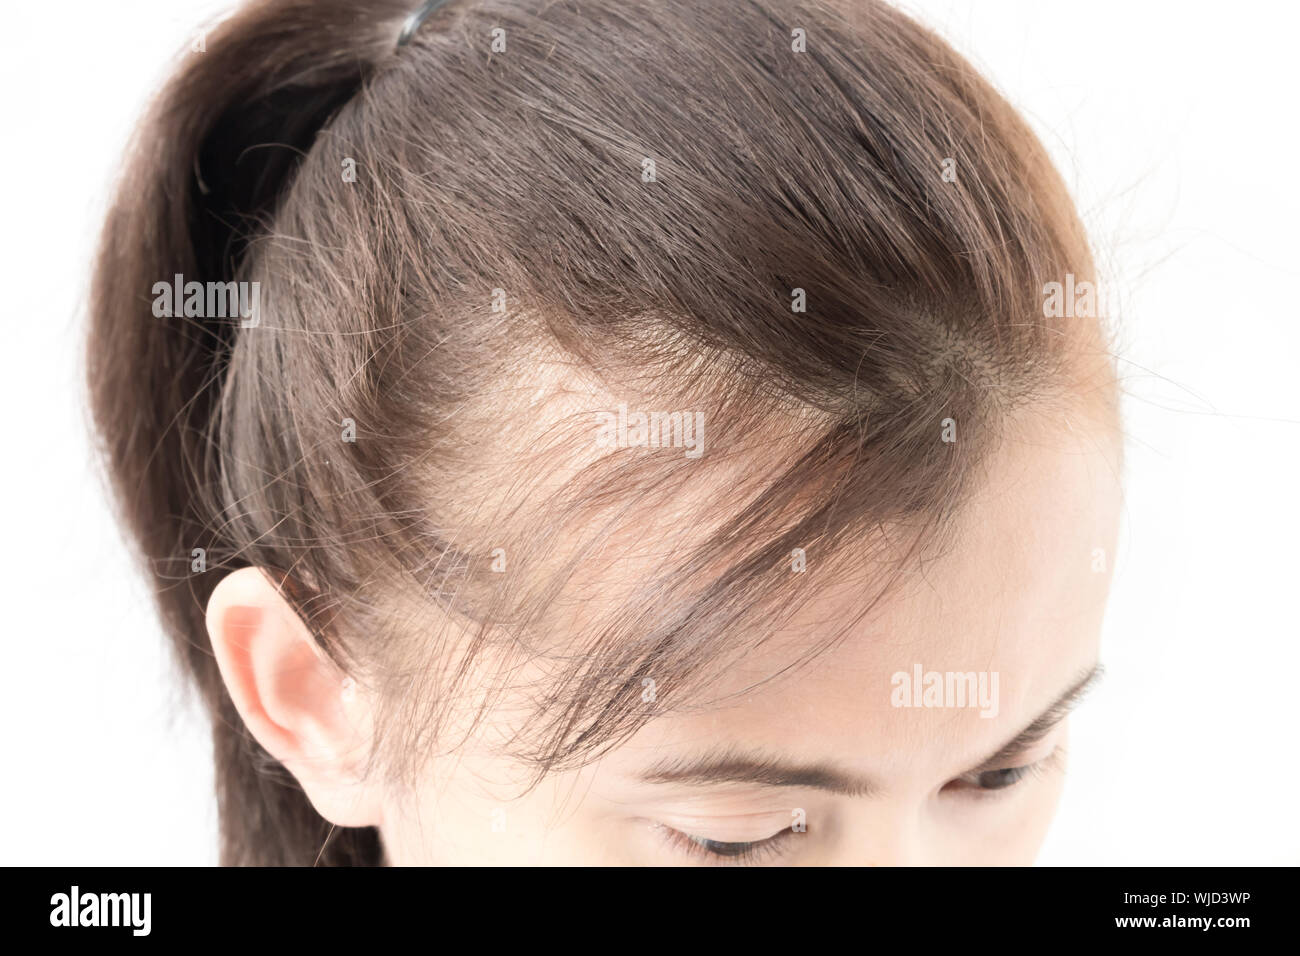 Close-up Of Young Woman With Receding Hairline Against White Background  Stock Photo - Alamy